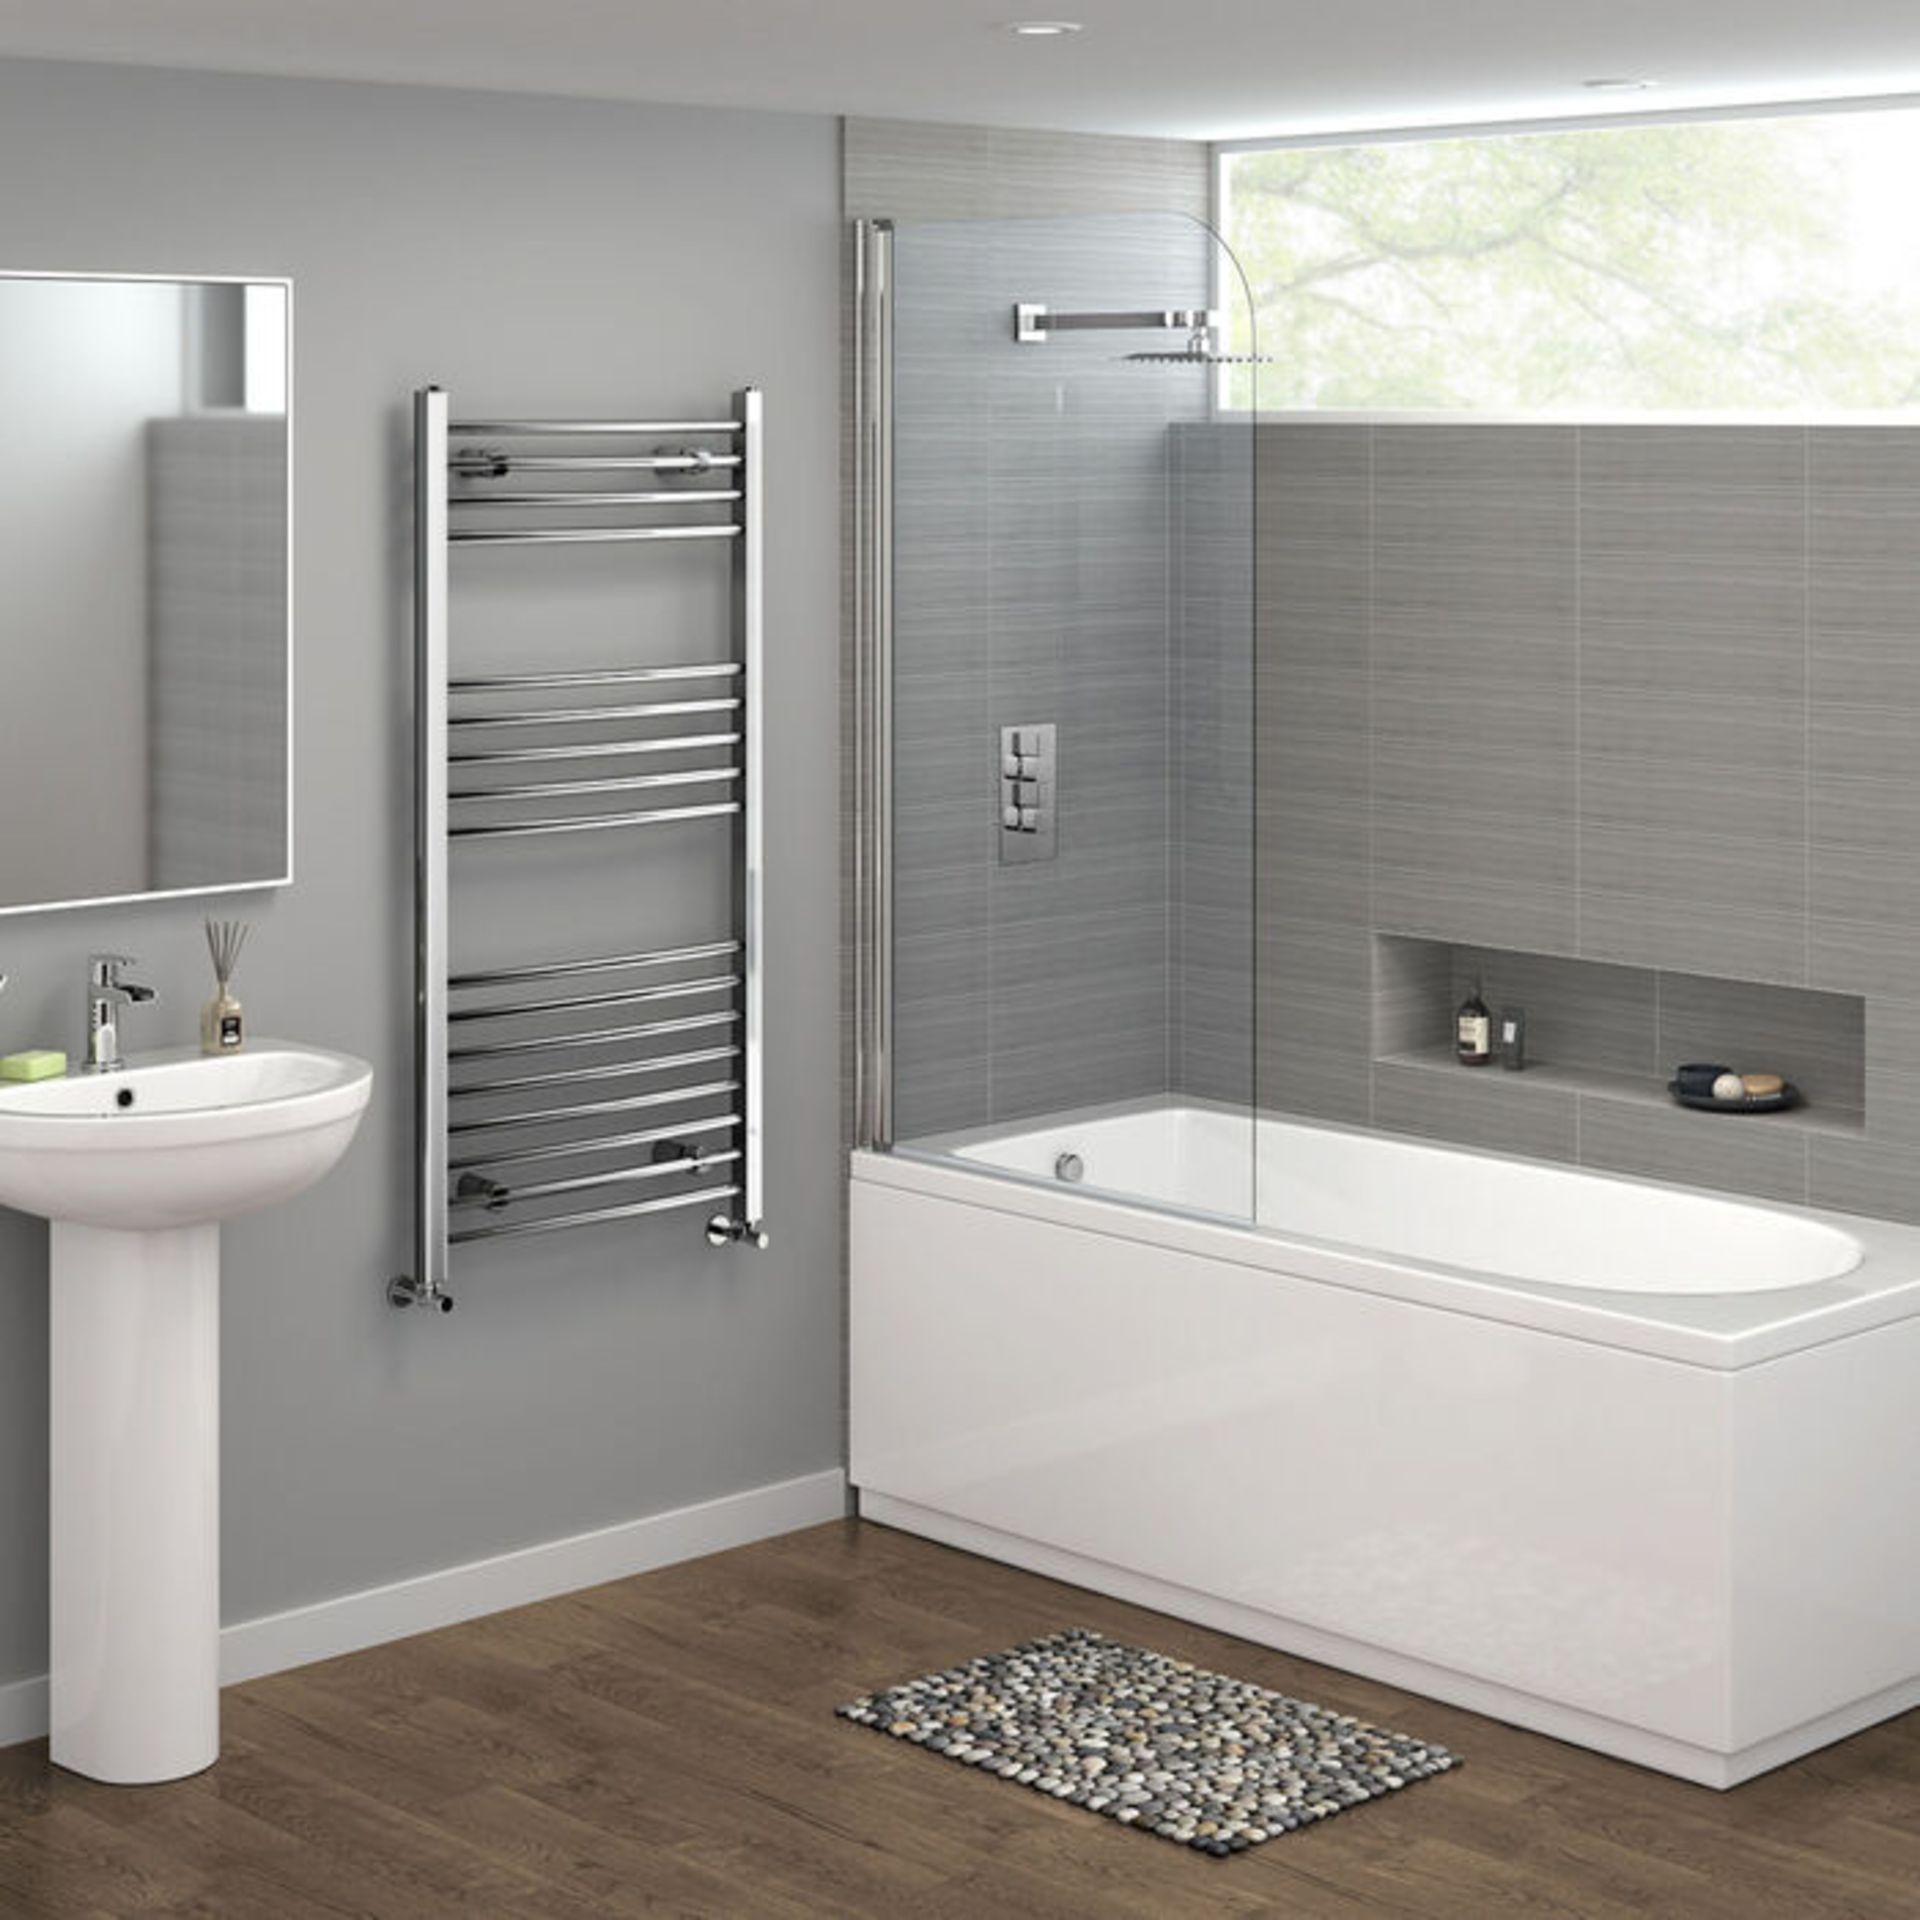 (PM52) 1200x600mm - 20mm Tubes - Chrome Curved Rail Ladder Towel Radiator. RRP £285.99. Made ... - Image 2 of 3